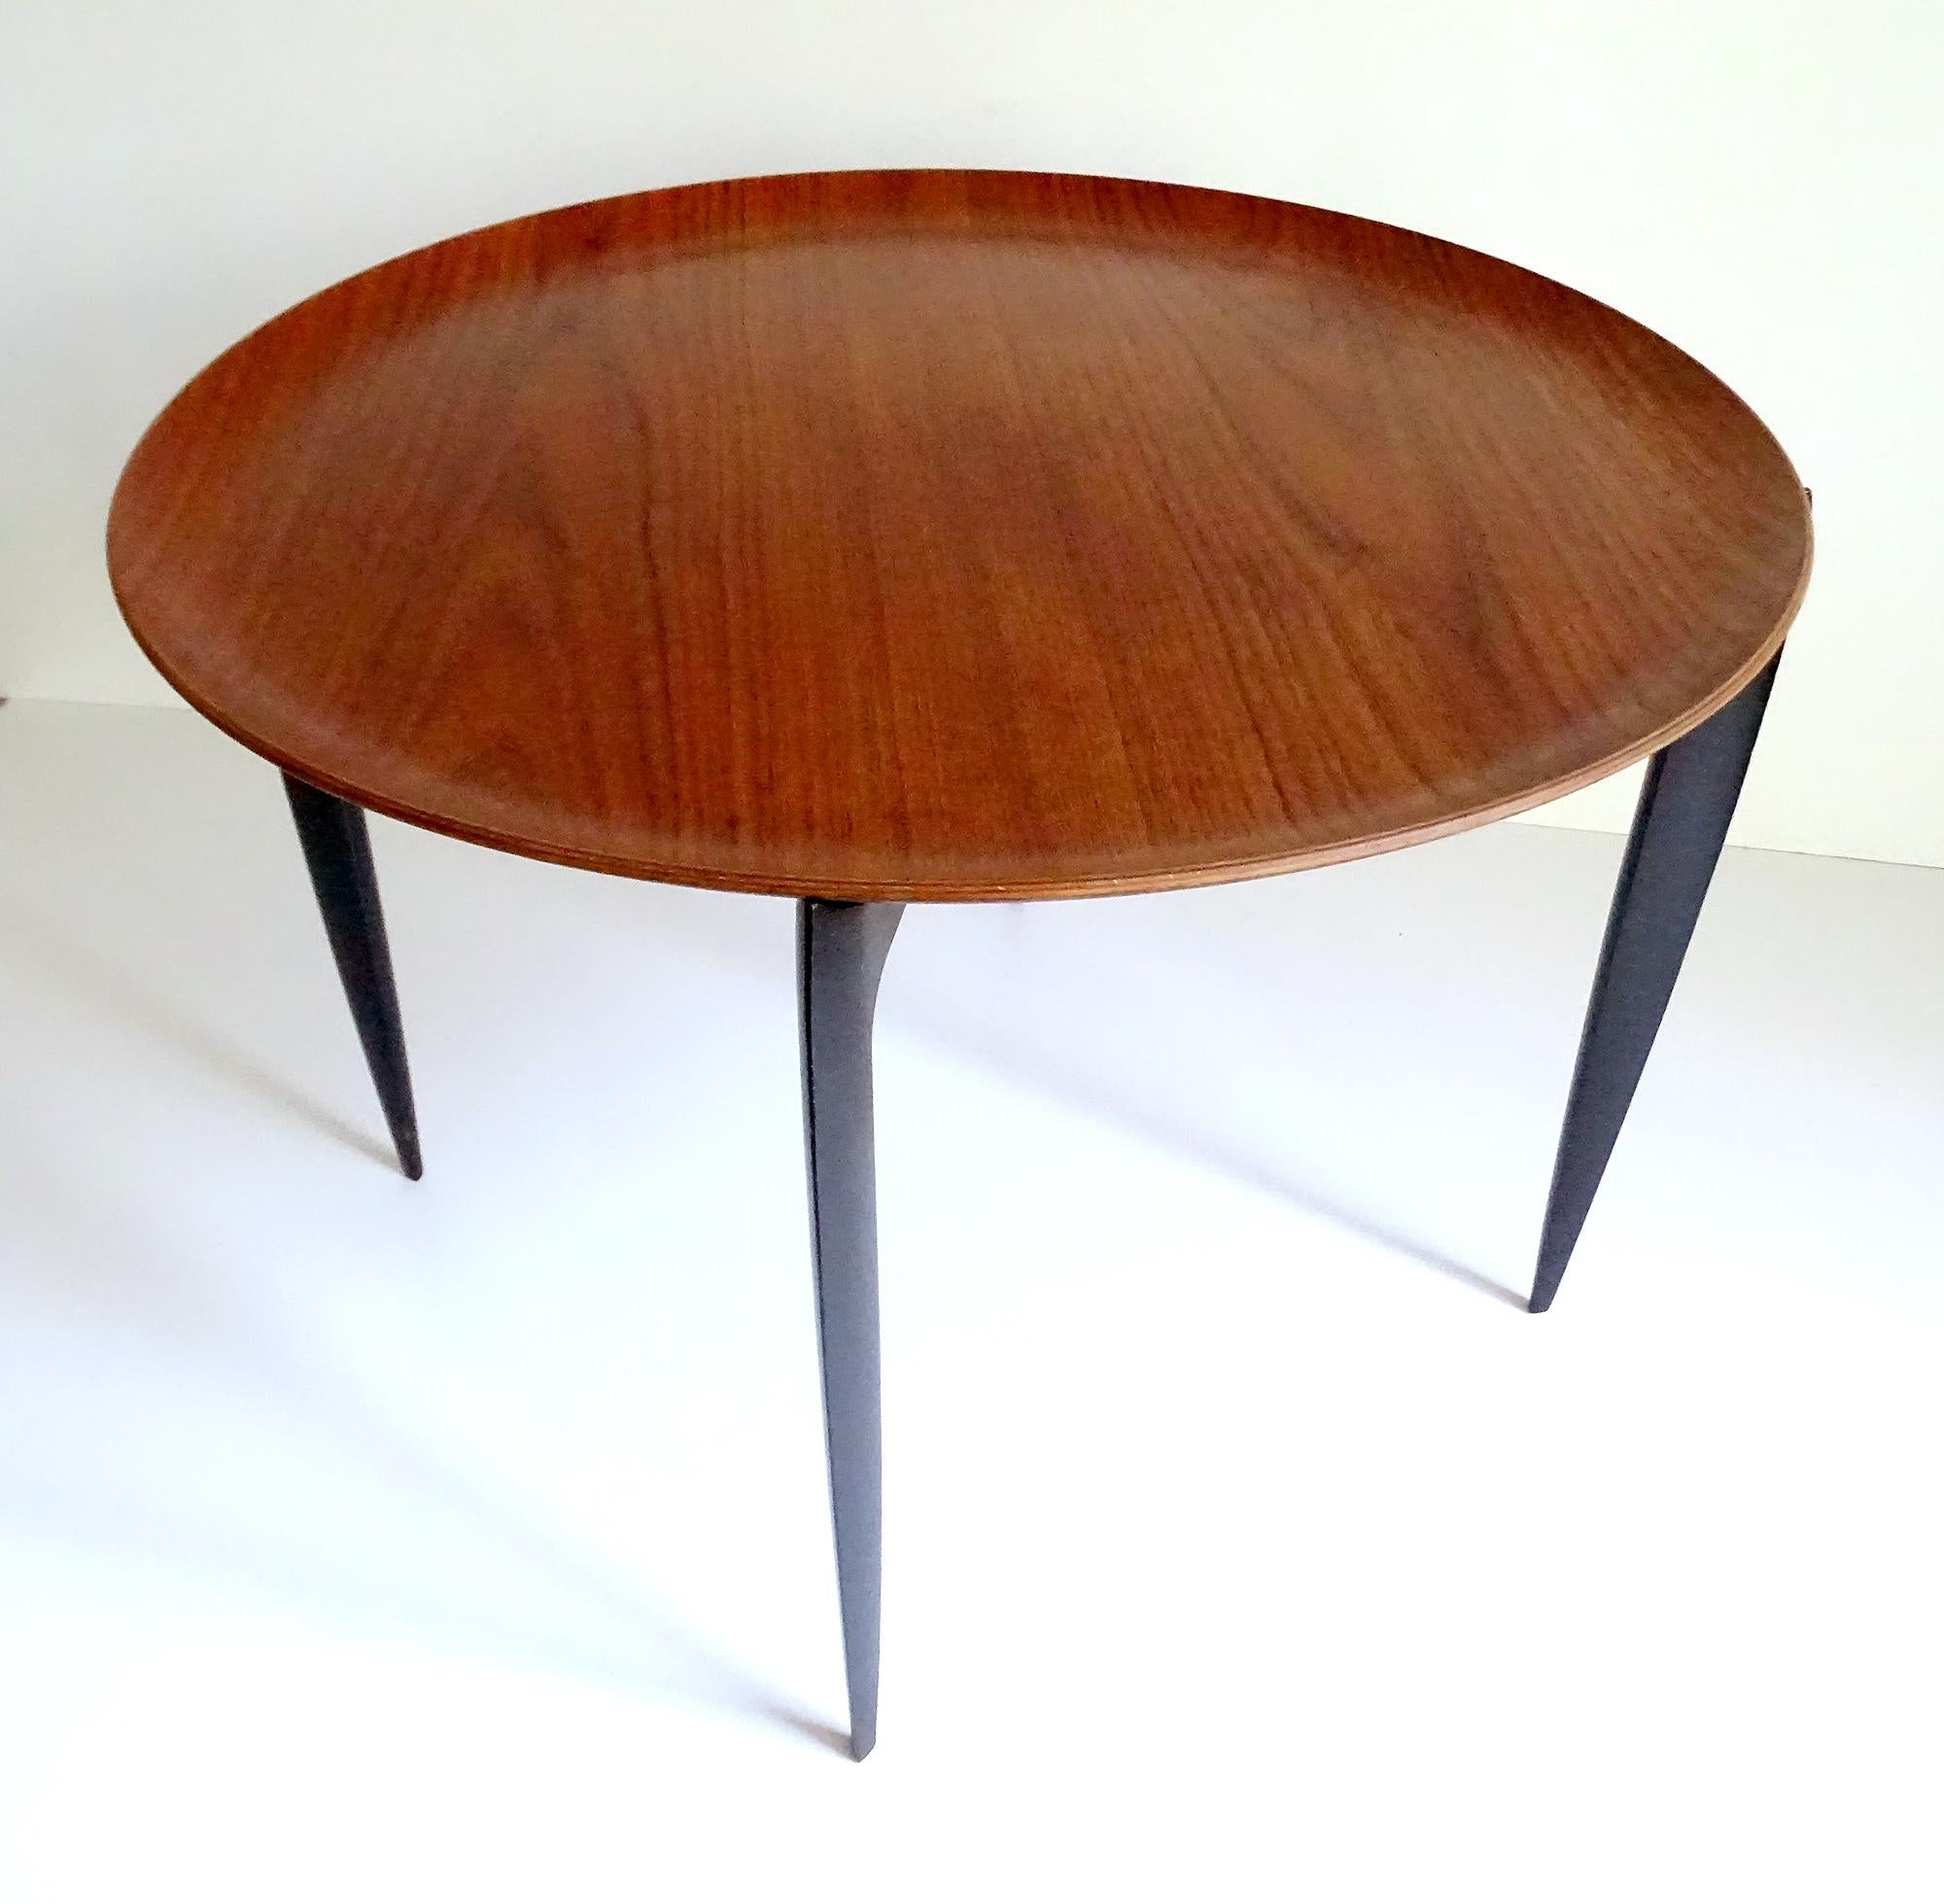 Rare folding table designed in 1958 by H. Engholm & Svend Age Willumsen. Manufactured by Fritz Hansen,
The tray lifts off for serving and transport. The ebonized base folds for storage.
Dimensions:
H 16.93 in. x Dm 23.63 in.
H 43 cm x Dm 60 cm.
    